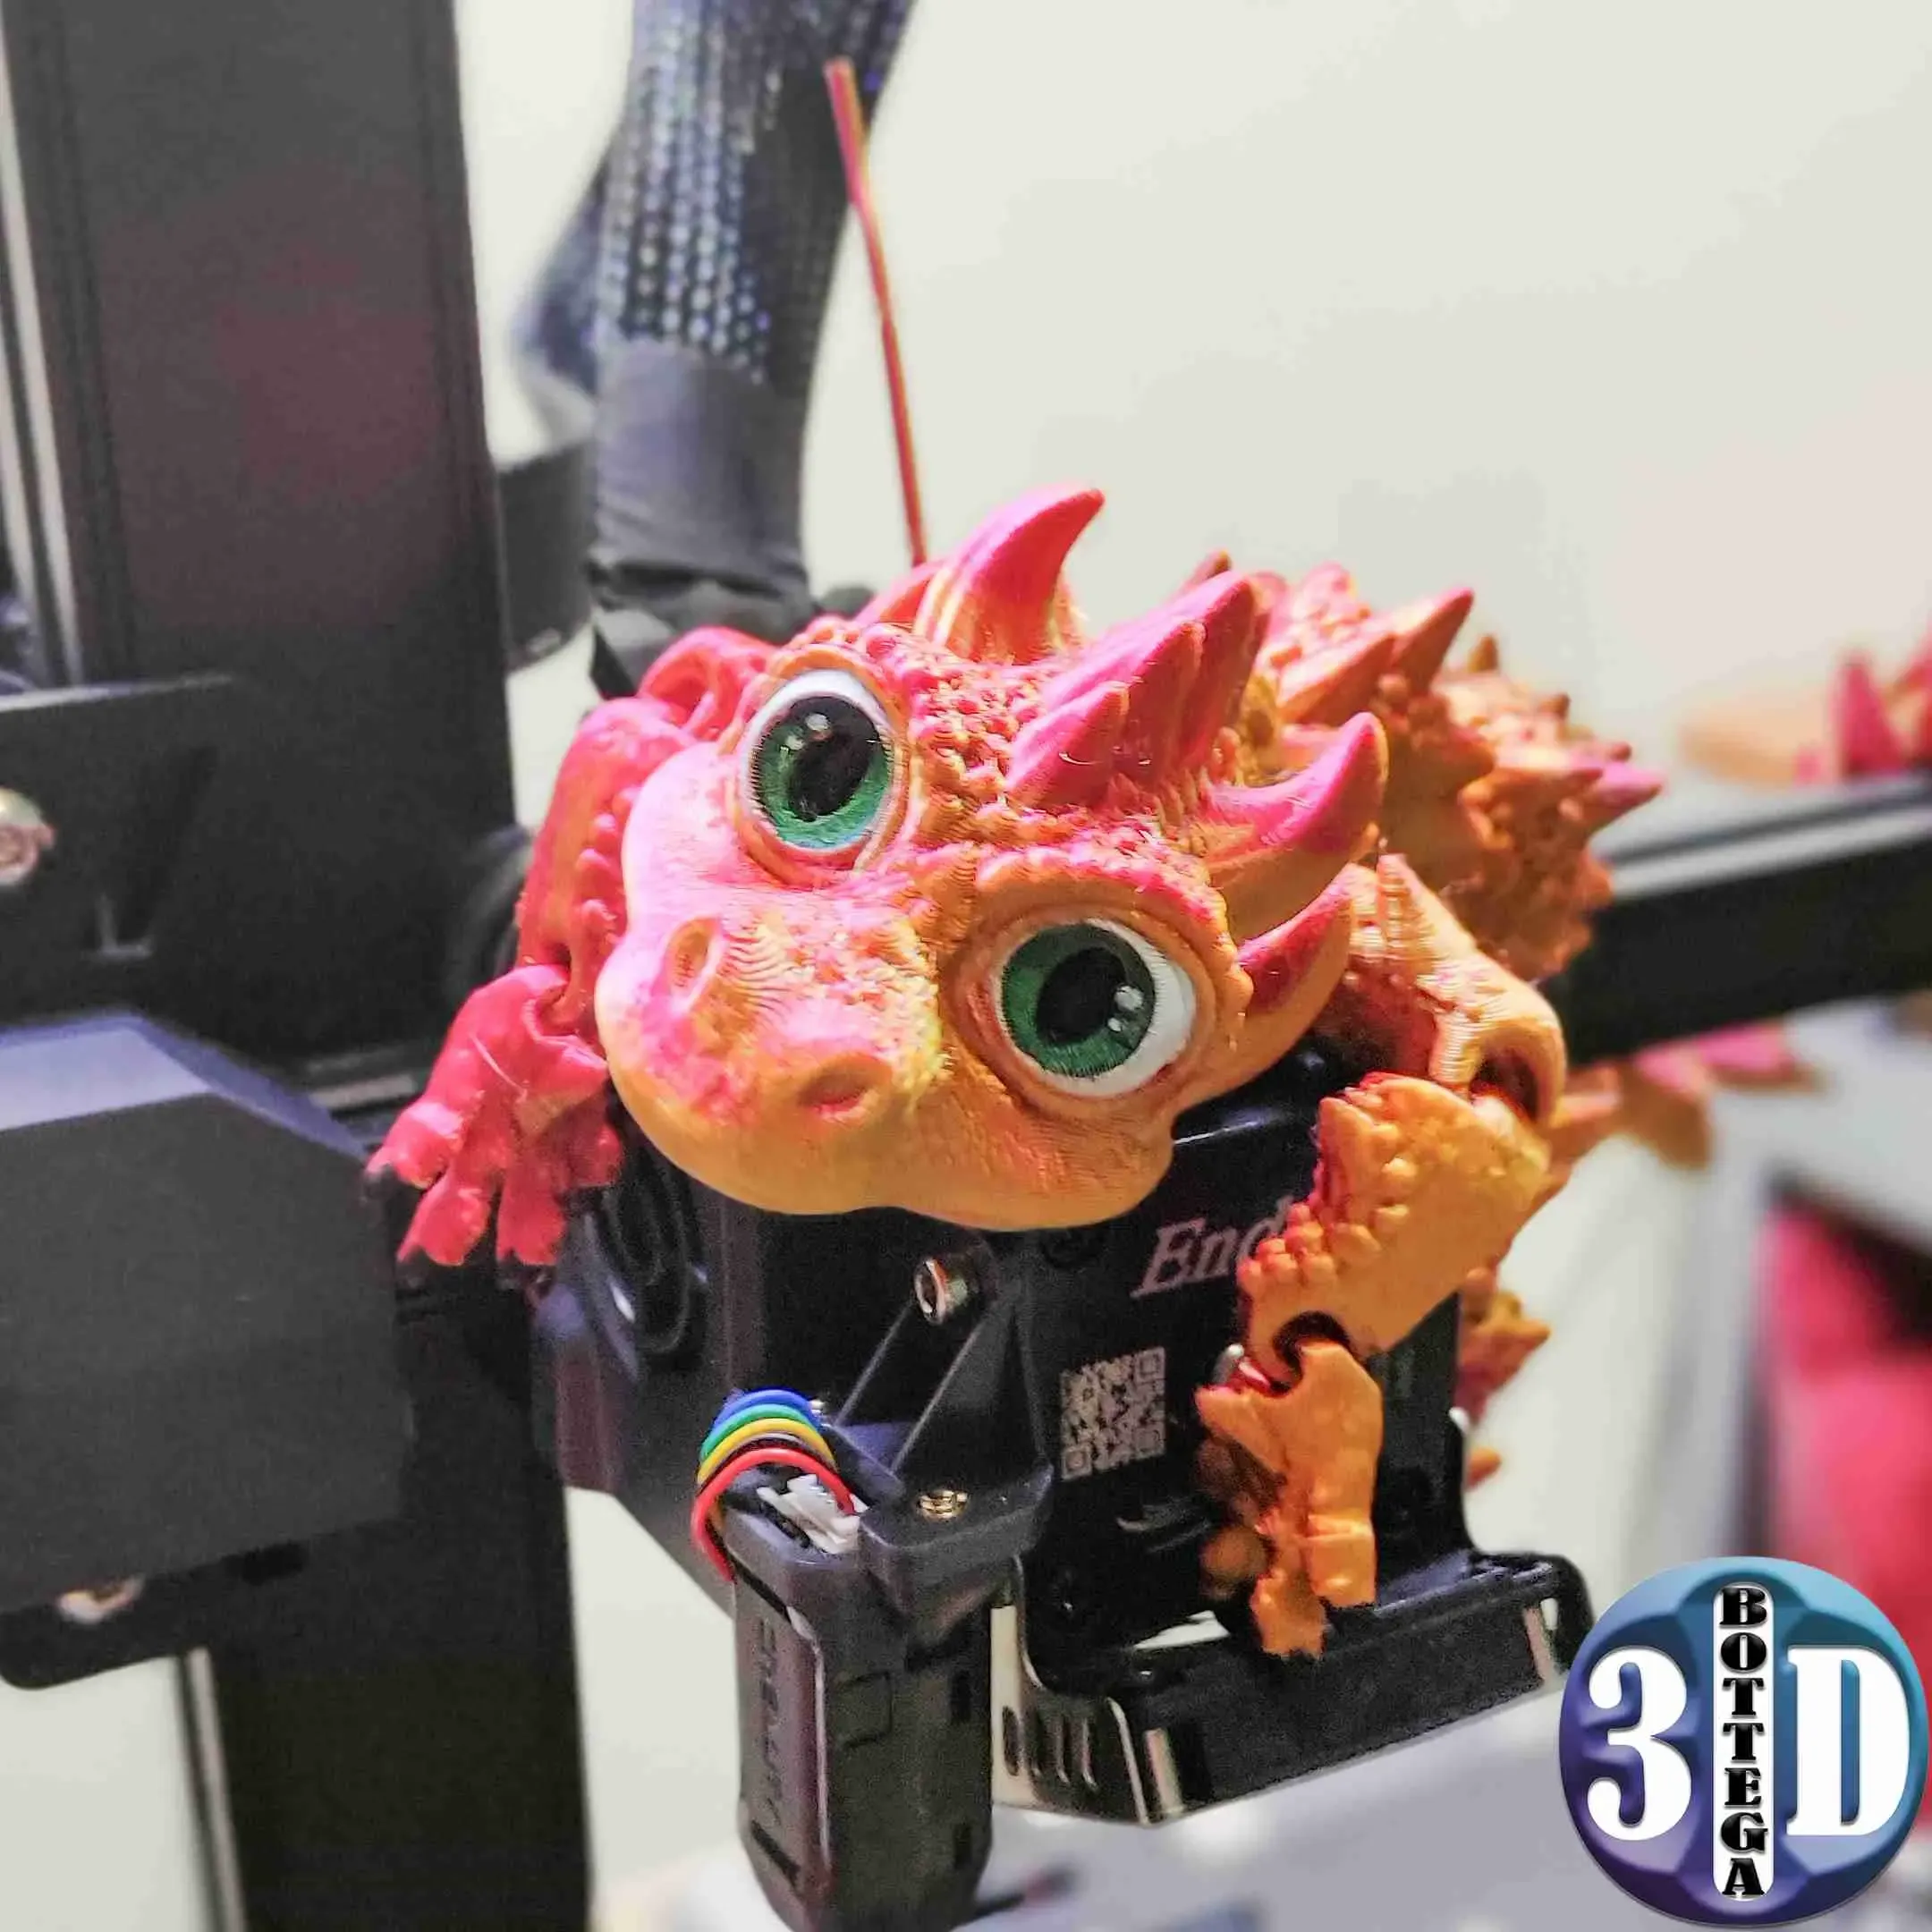 Articulated baby Dragon, print in place, no supports